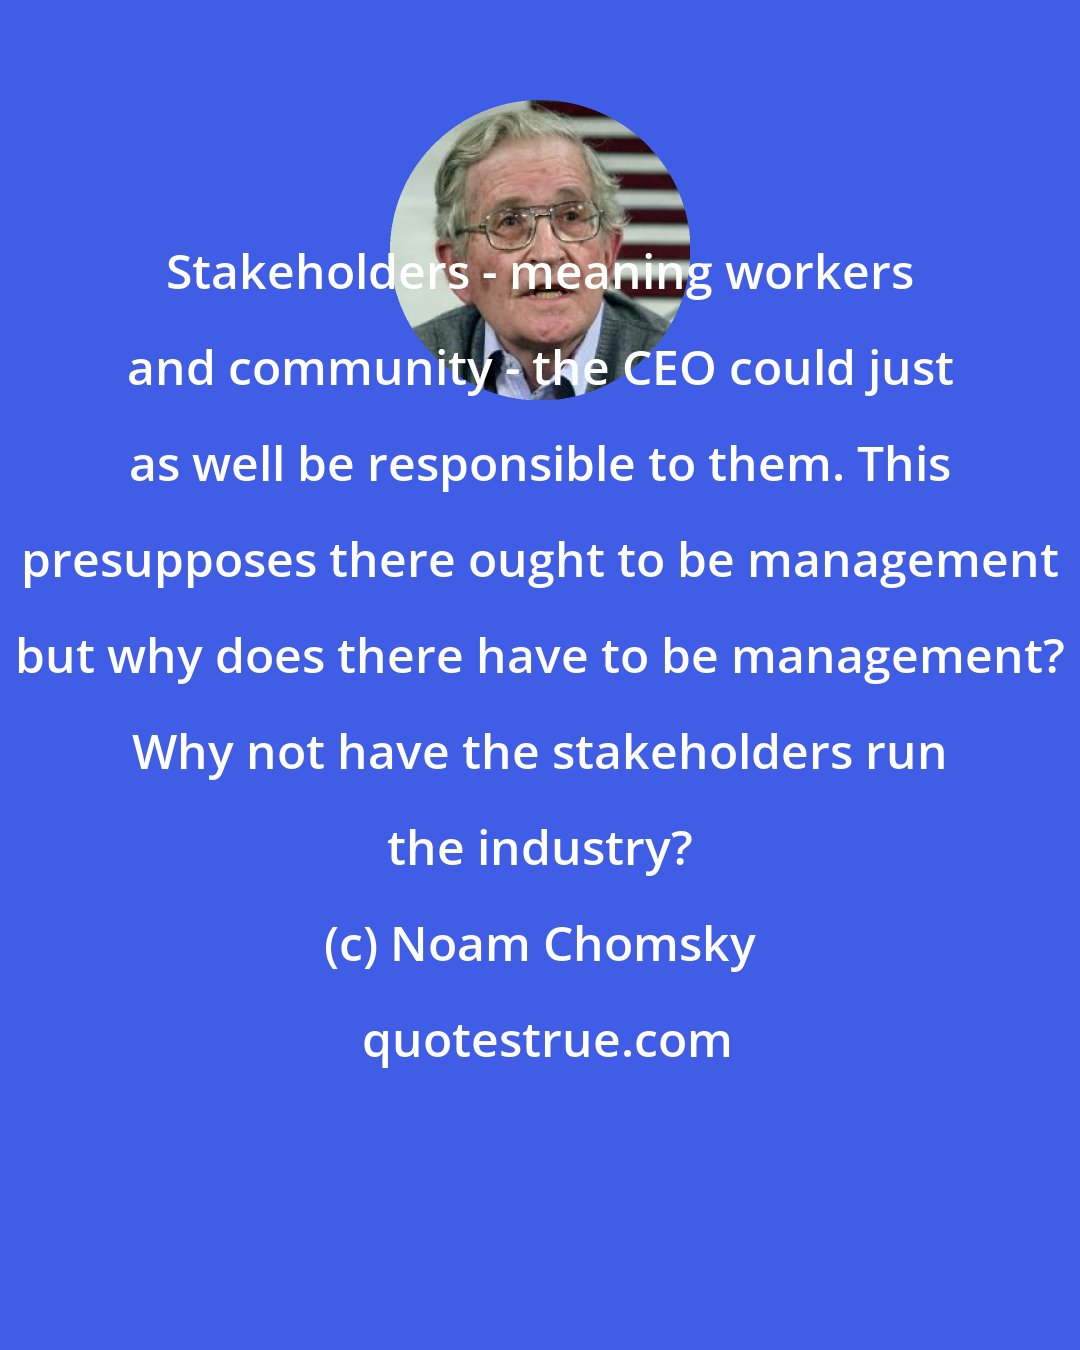 Noam Chomsky: Stakeholders - meaning workers and community - the CEO could just as well be responsible to them. This presupposes there ought to be management but why does there have to be management? Why not have the stakeholders run the industry?